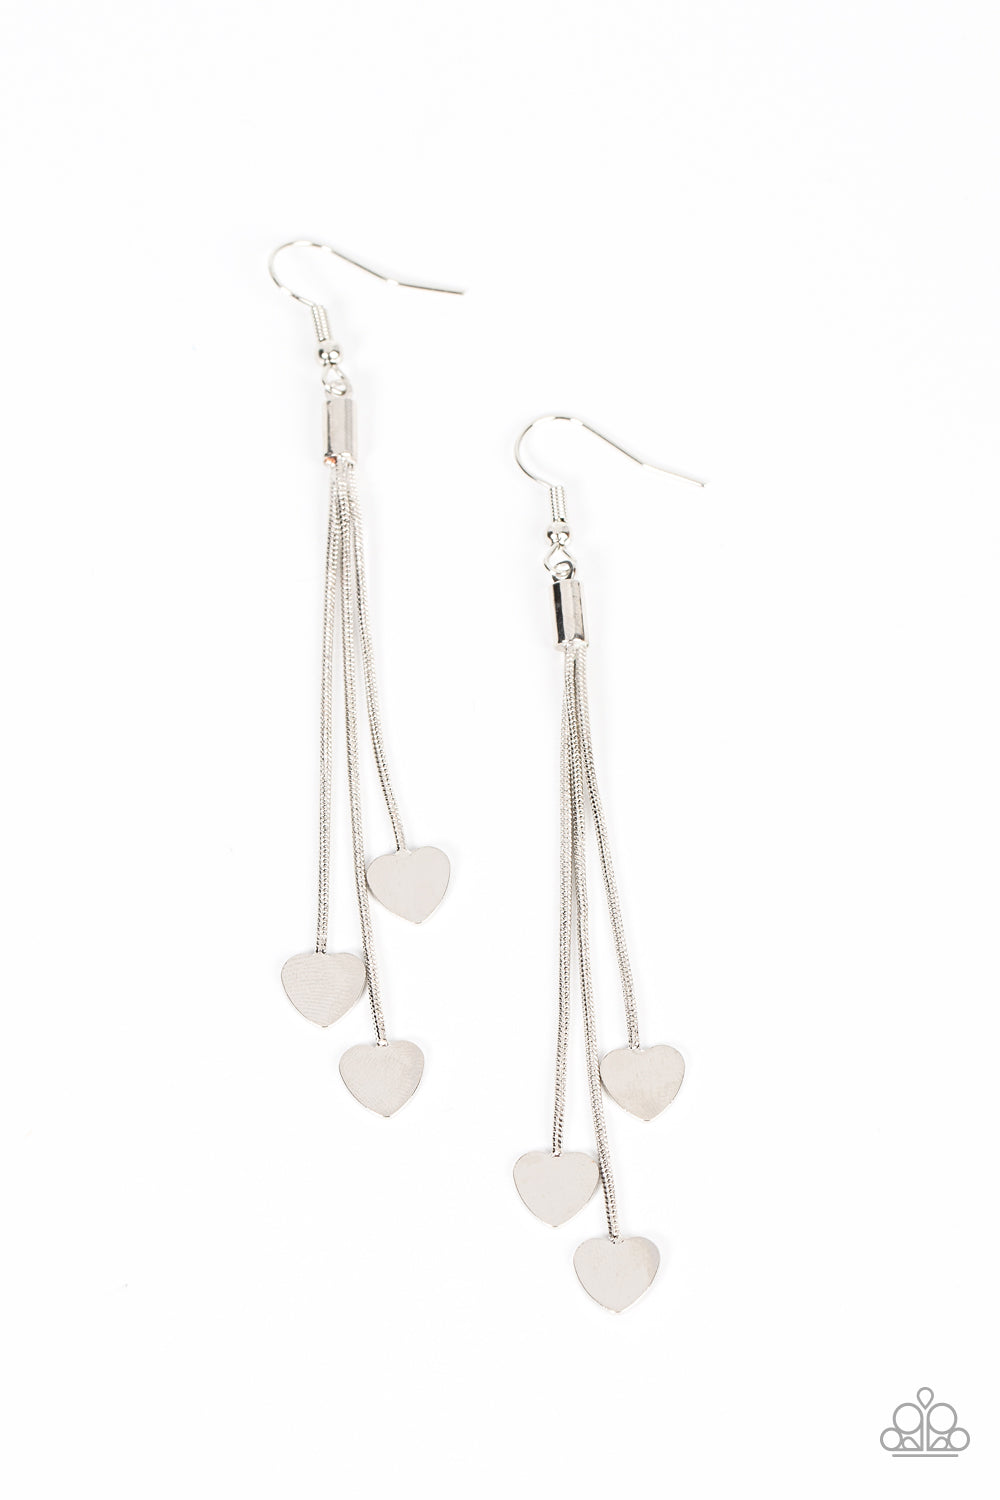 Paparazzi Higher Love - Silver Earrings - A Finishing Touch Jewelry